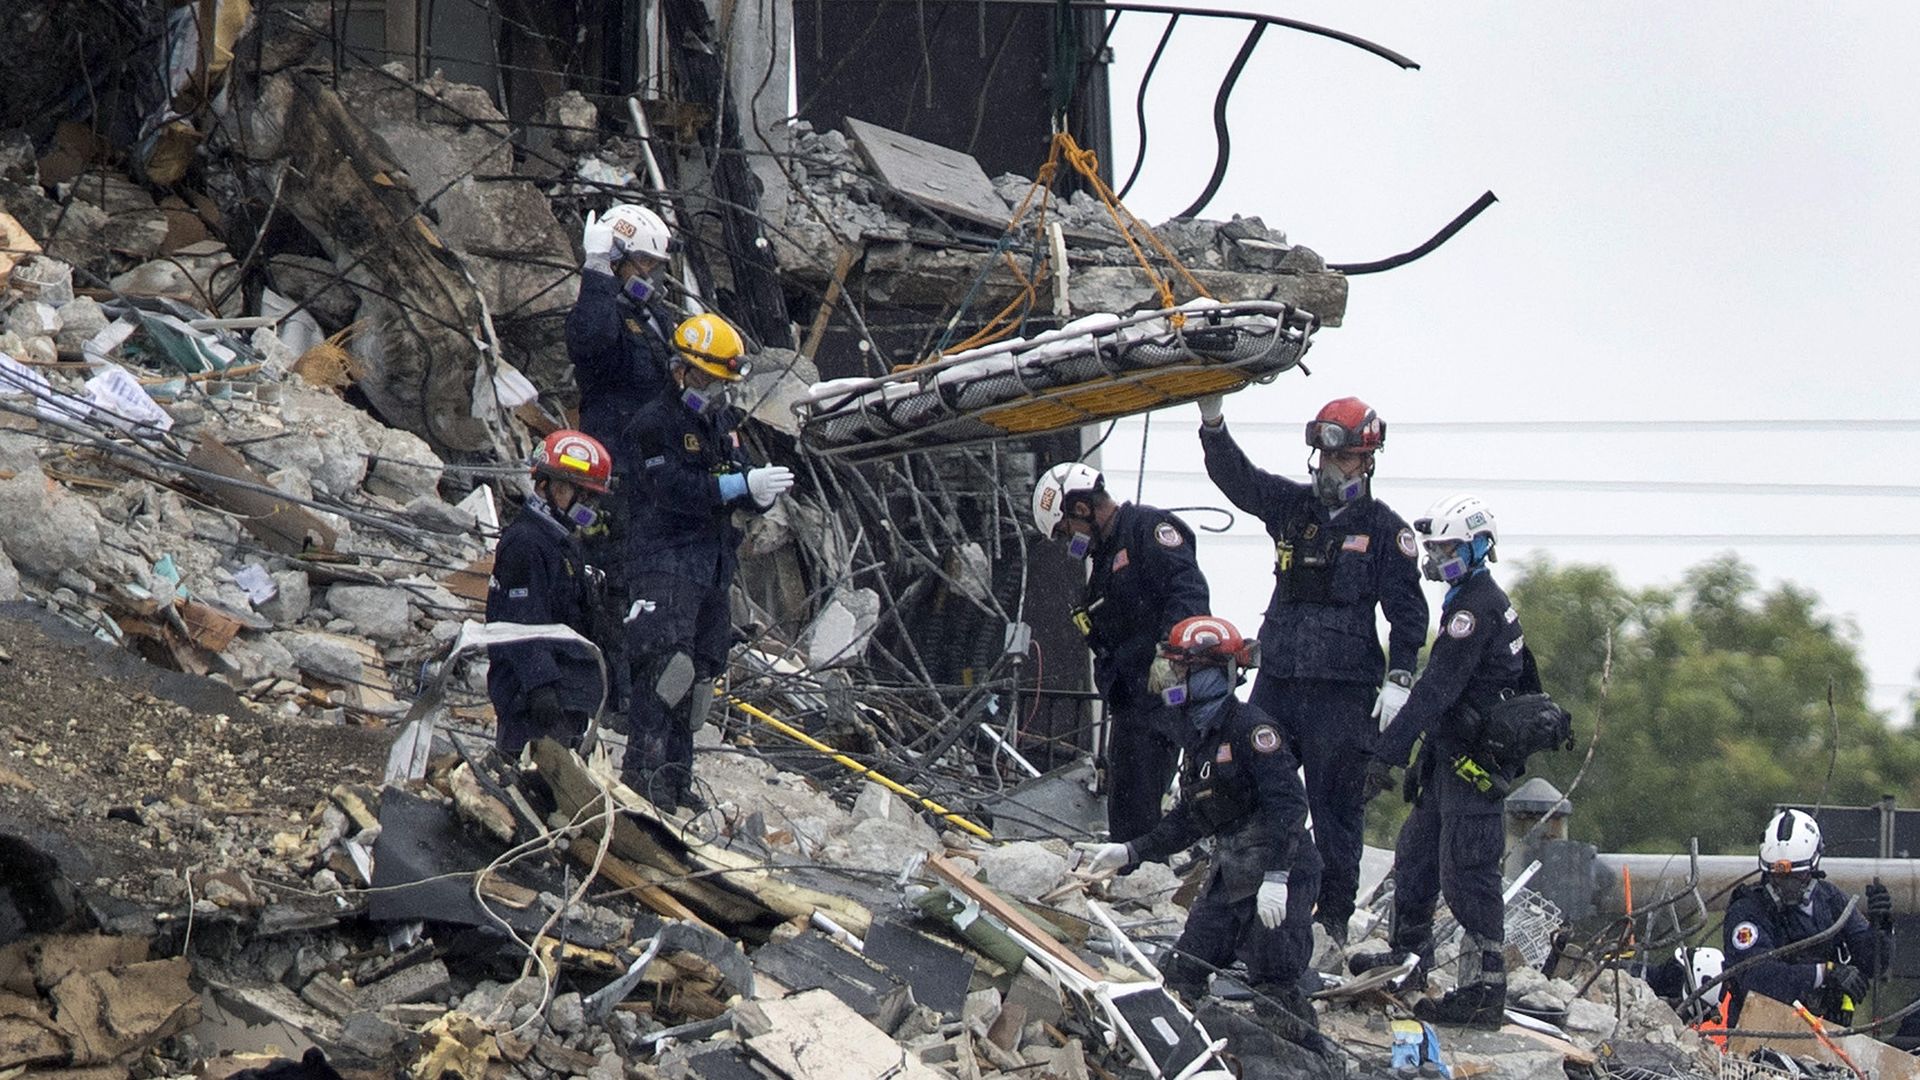 Rescue personnel remove a stretcher from the rubble of the Champlain Towers South condo building on June 28, 2021 in Surfside, Florida.